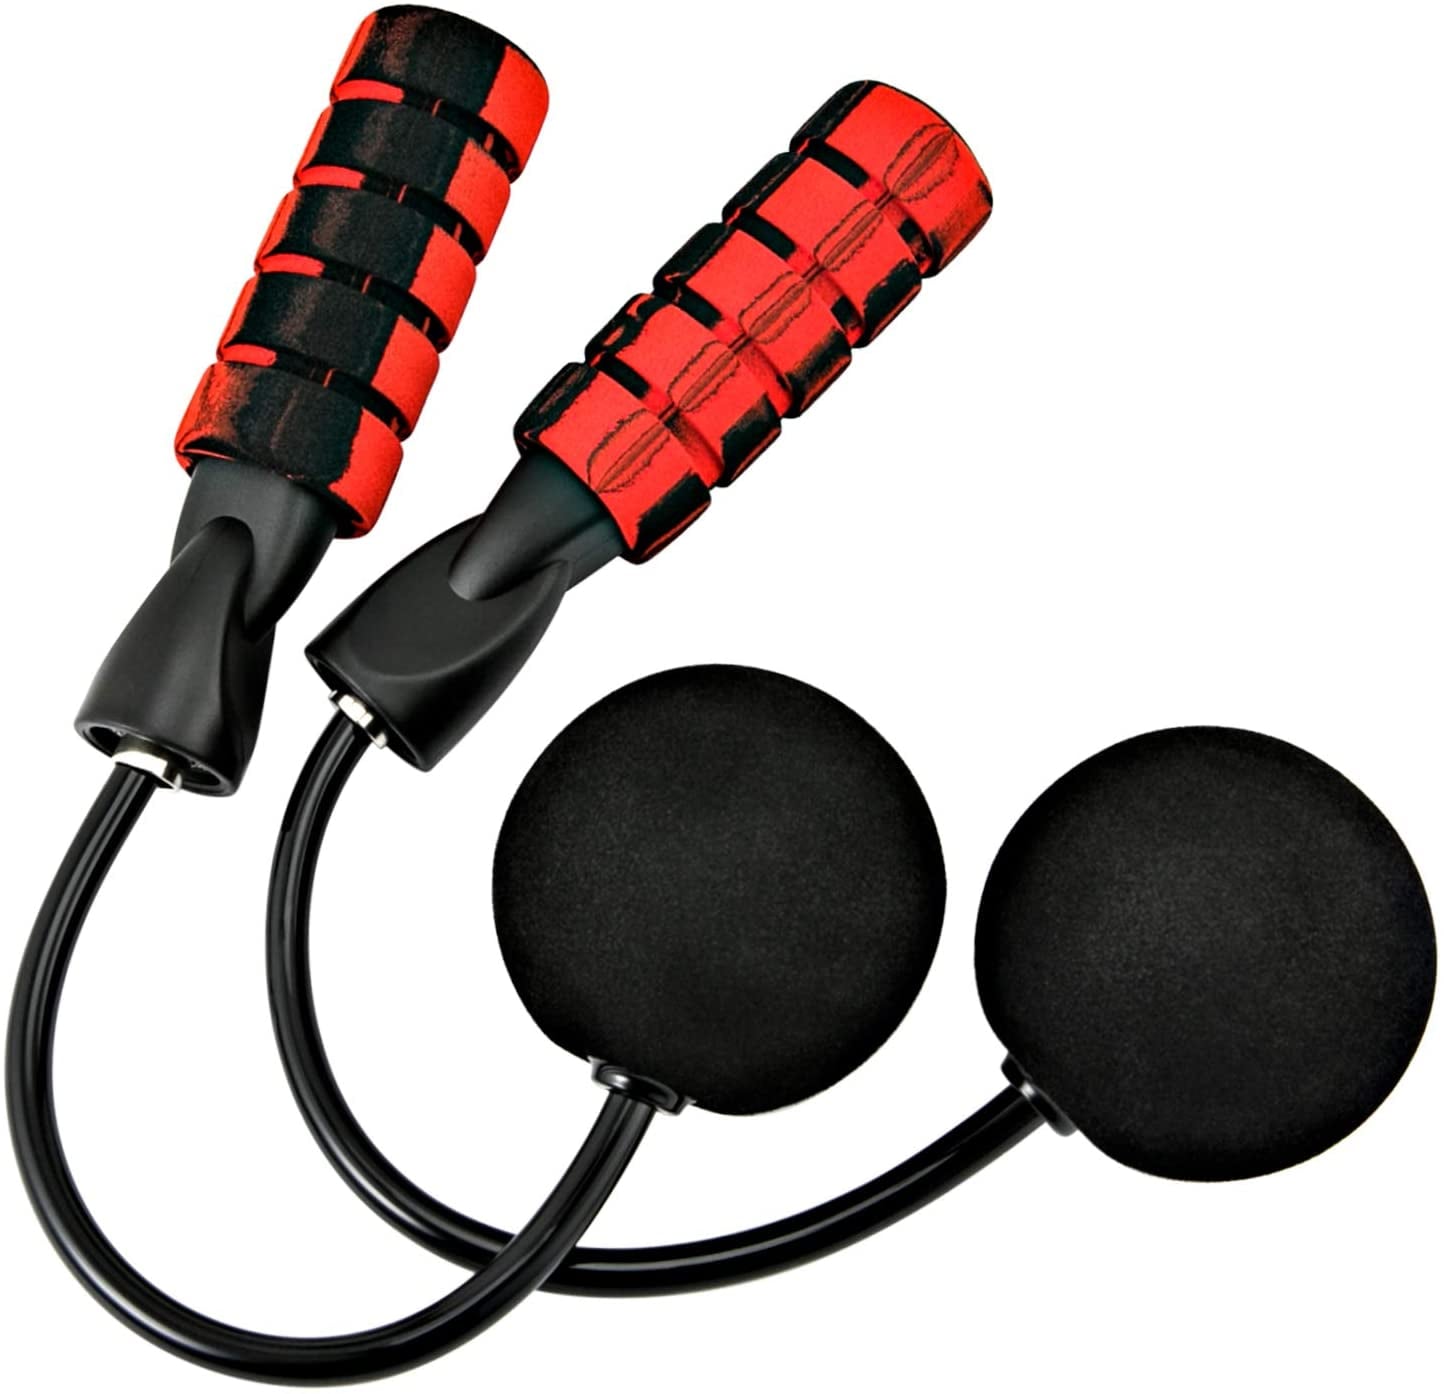 Jump Rope Cordless Skipping Ropeless Indoor Outdoor Train Weighted Skipping UK 